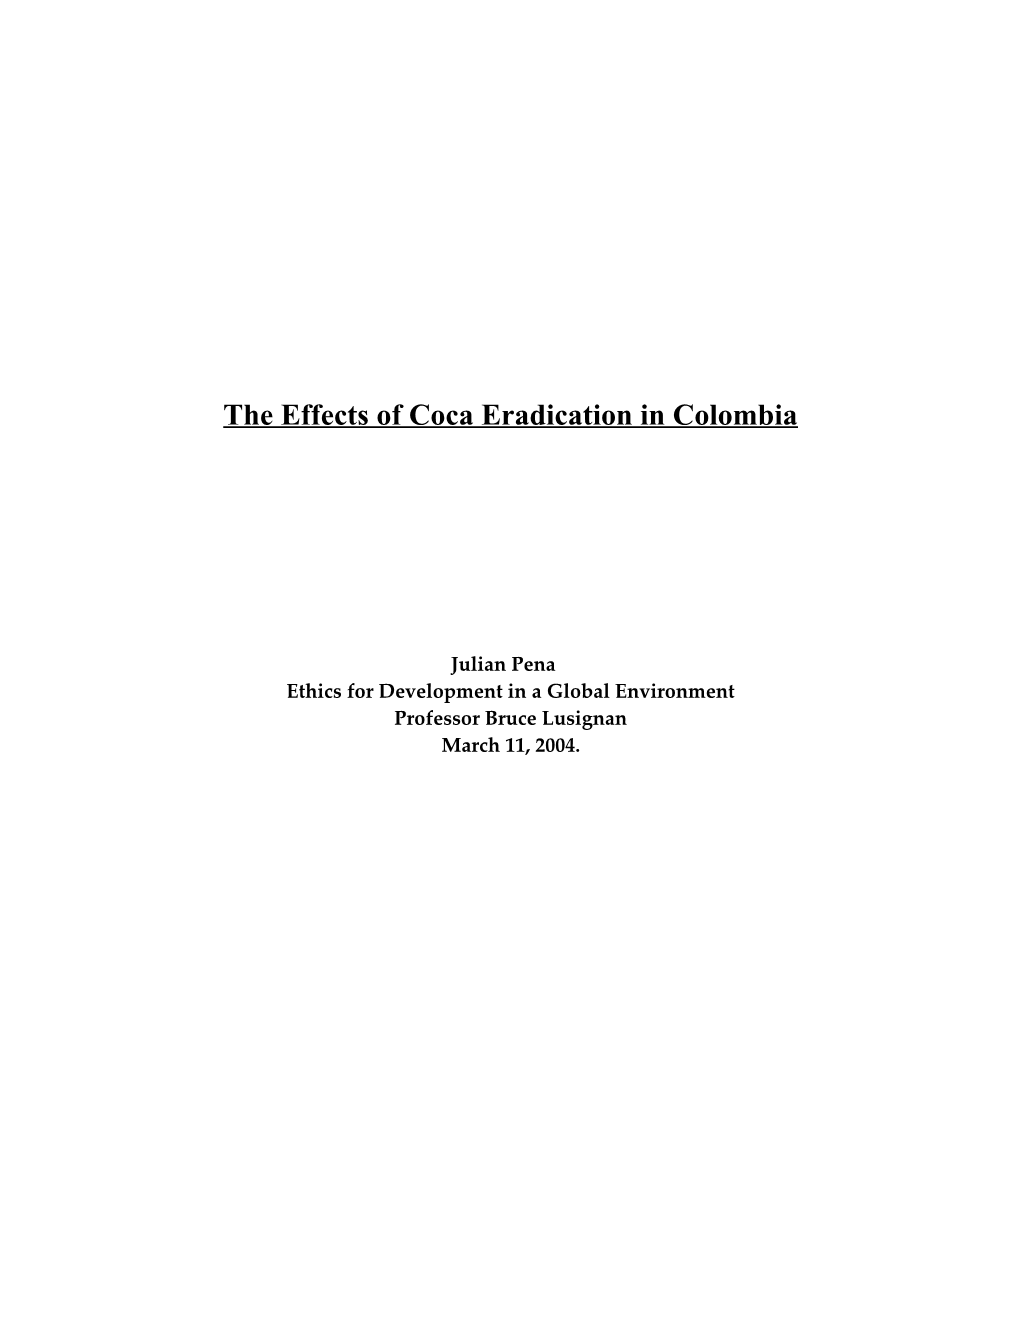 The Effects of Coca Eradication in Colombia